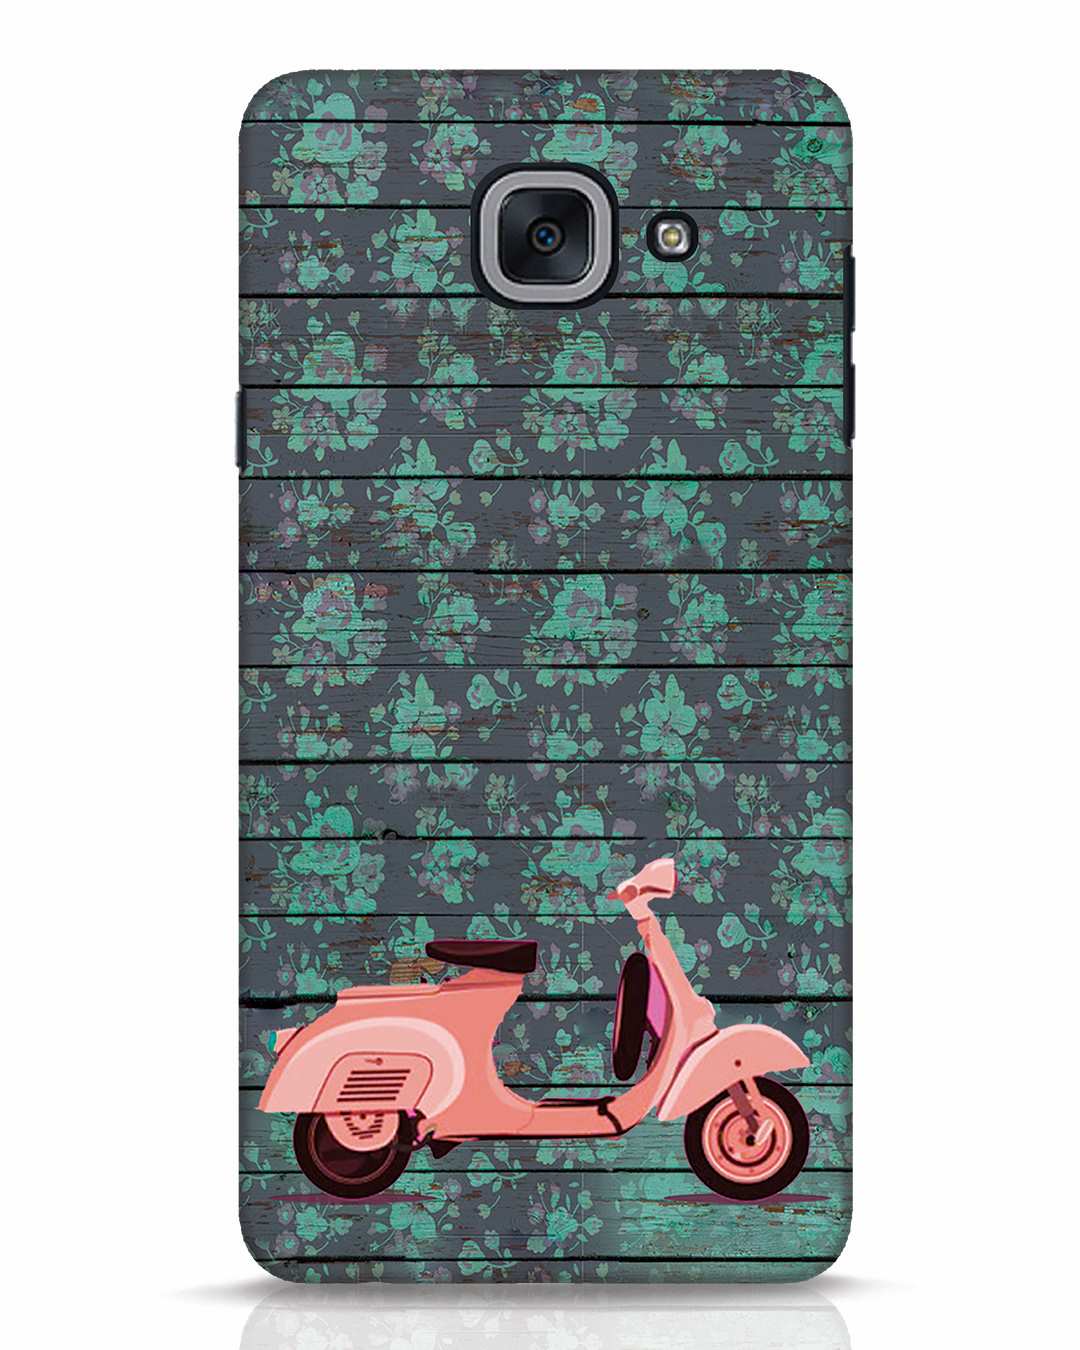 Scooty Samsung Galaxy On Max Mobile Cover Samsung Galaxy On Max Mobile Covers Bewakoof.com